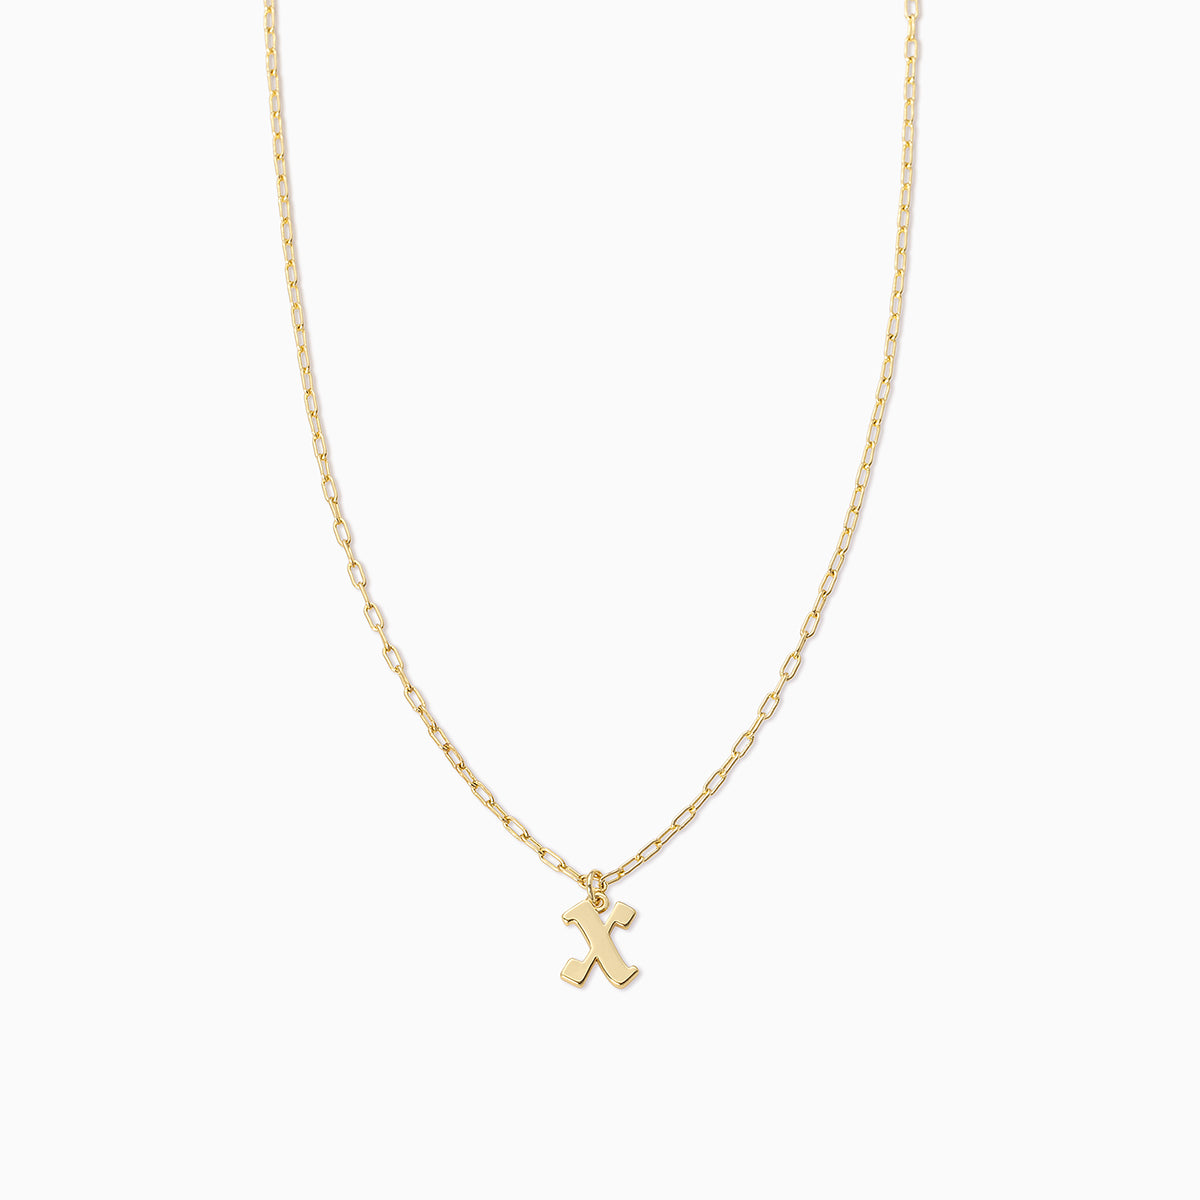 Gothic Initial Pendant Necklace | Gold X | Product Image | Uncommon James